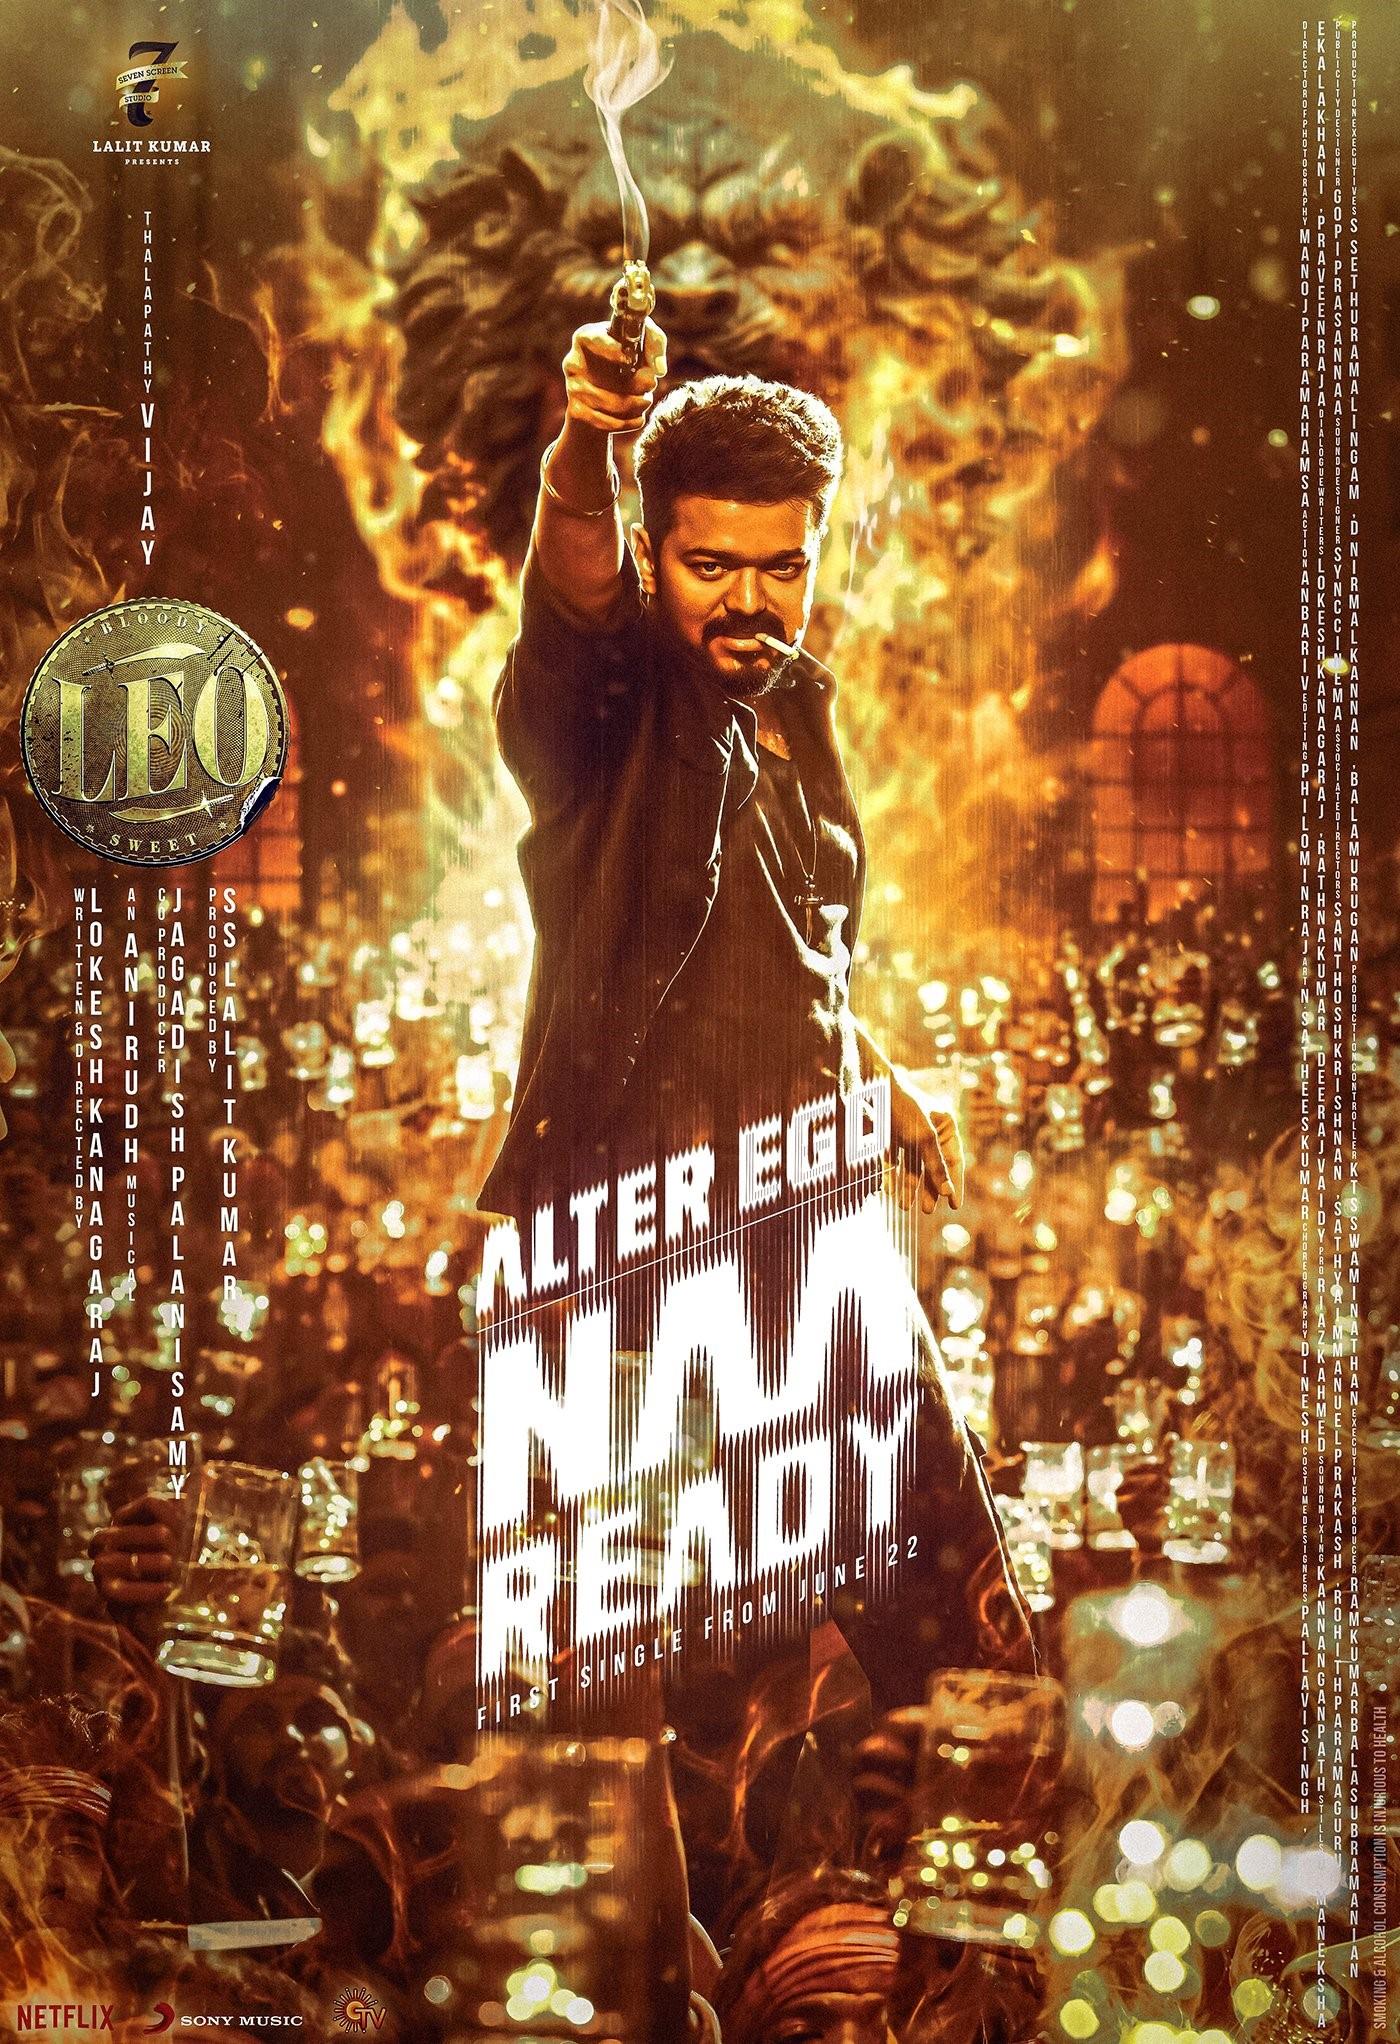 Leo first single titled Naa Ready! New poster feat. Vijay Tamil Movie